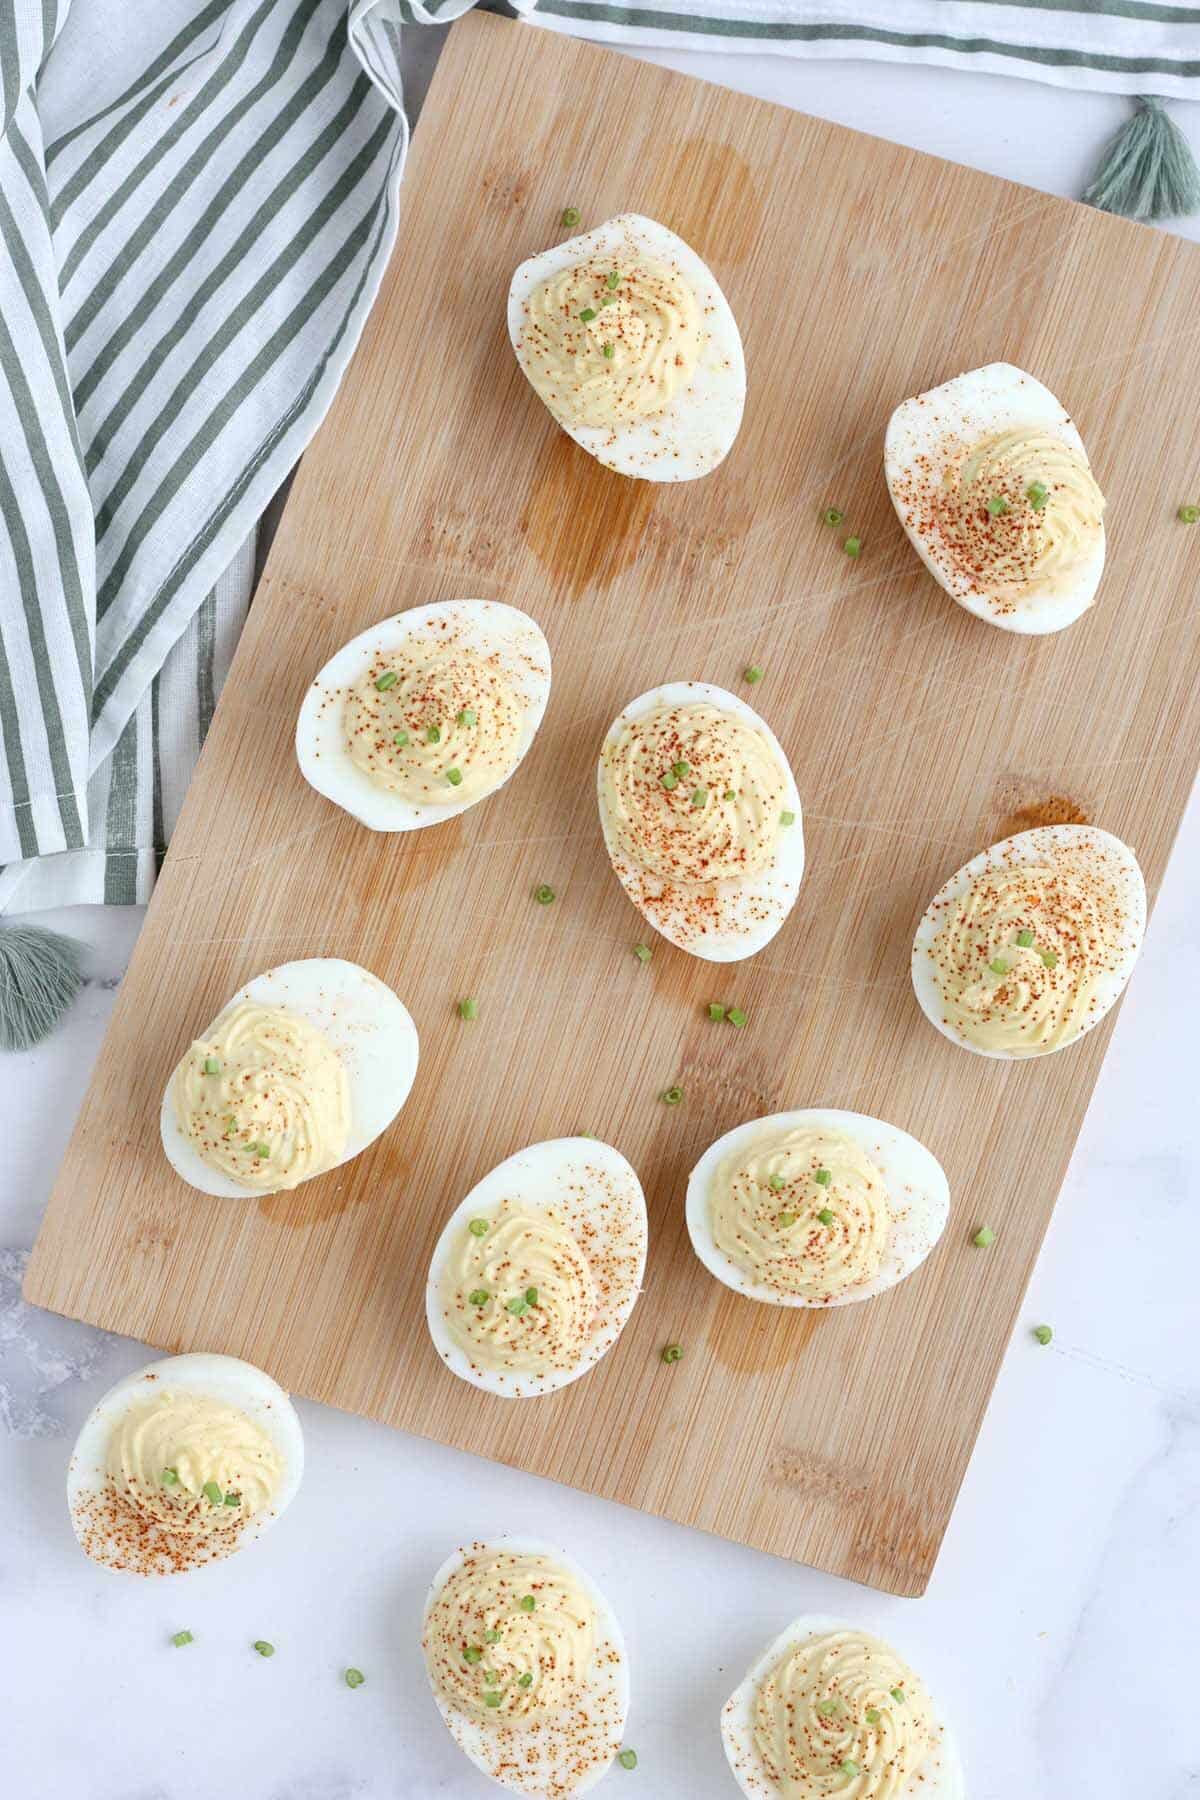 deviled eggs scattered on a wooden cutting board